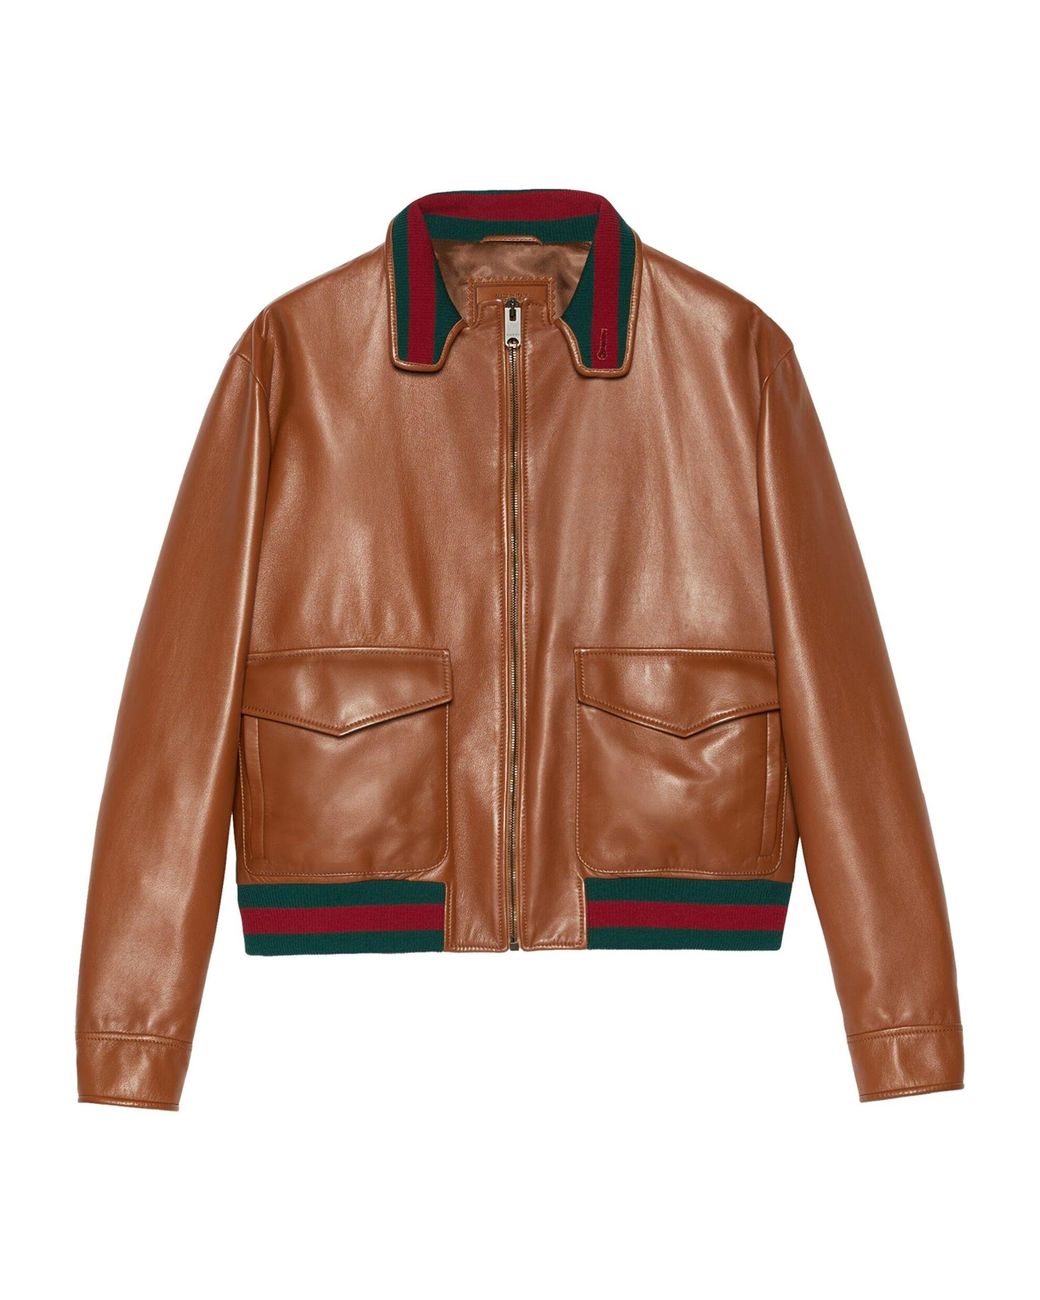 Gucci Men's GRG Taped Leather Bomber Jacket